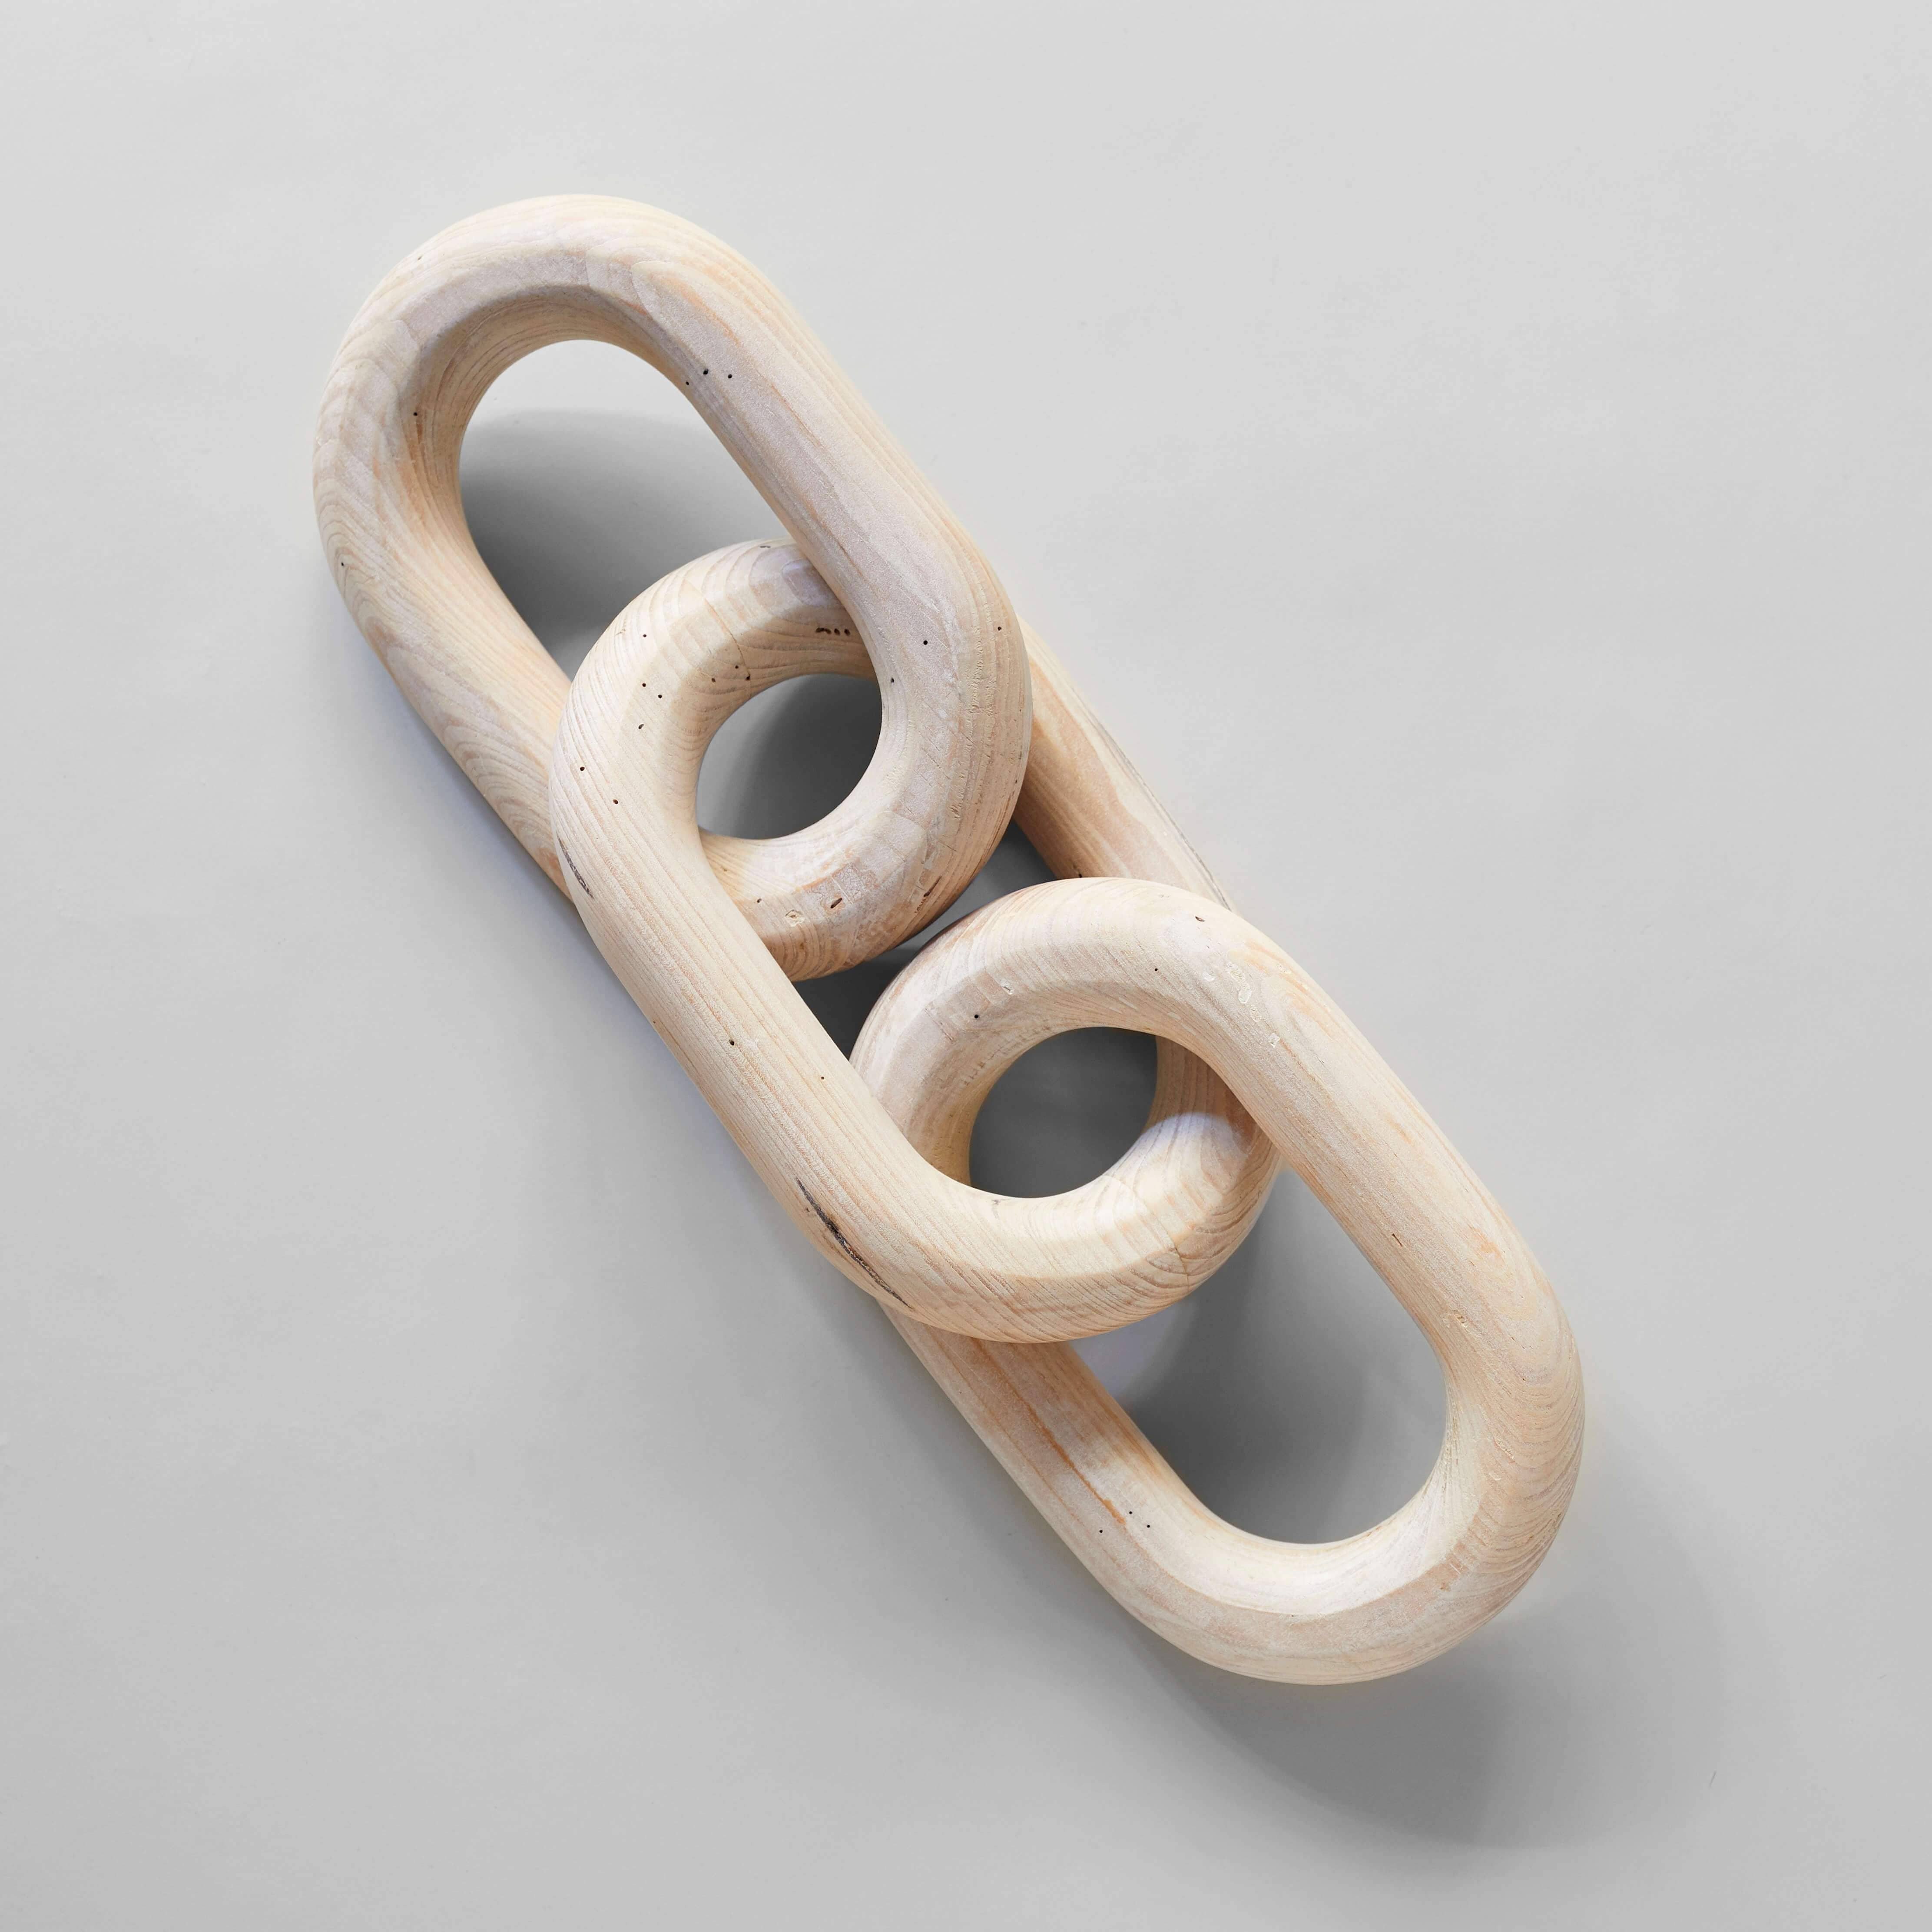 Pale Wood Chain, 5 Link